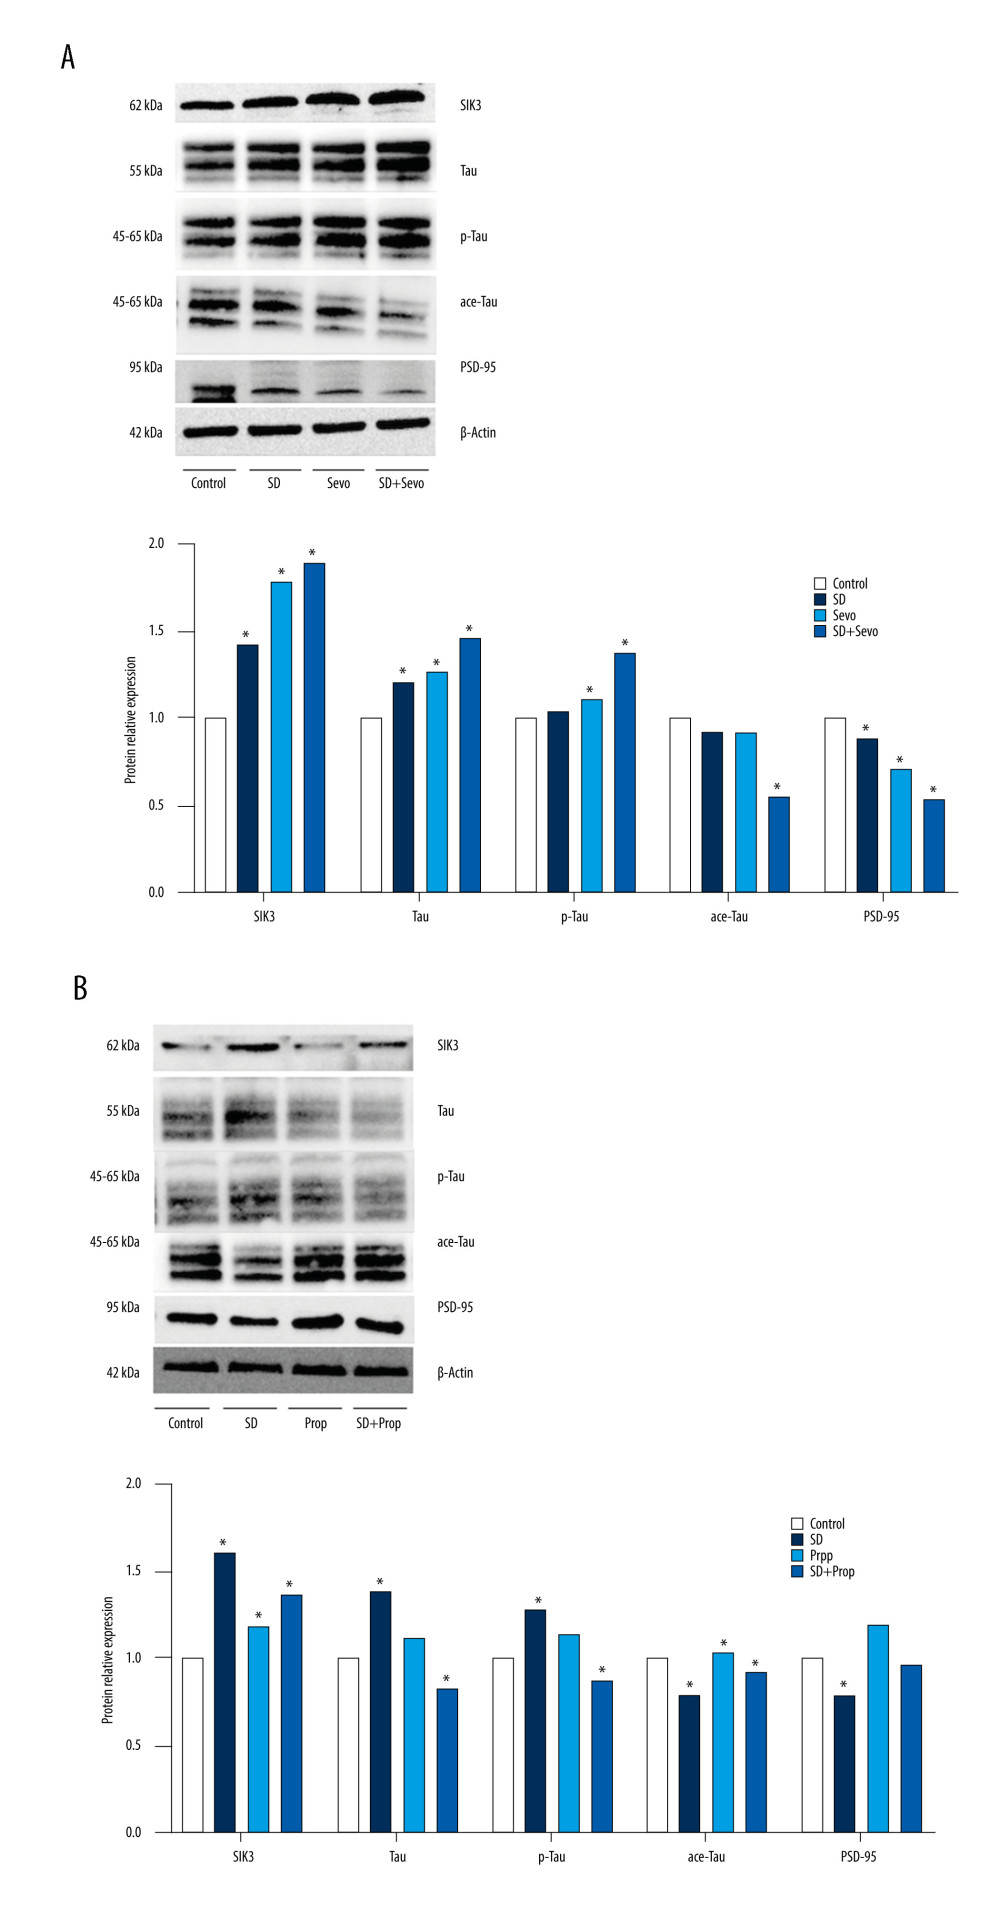 Expression of SIK3, PSD-95, and proteins associated with tau modification before administration of inhibitor or agonist in rats(A) Compared with the Control group, the expression level of tau protein in the hippocampus in the SD group was upregulated. Tau protein phosphorylation’s expression level was significantly upregulated, with a decreased acetylation level and an increased phosphorylation/acetylation ratio. The Sevo group exhibited increased SIK3 expression, while other changes were similar to those in the SD group. There was no statistically significant difference between the 2 groups. Compared with the SD group, the expression of SIK3 in the SD+Sevo group was upregulated. The levels of tau and its phosphorylation were increased, and the phosphorylation/acetylation ratio was increased, with statistical significance. In the change of PSD-95, the expression of the SD+Sevo group was significantly reduced. Simultaneously, the SD group and Sevo group also showed a certain degree of expression decline, and the difference was statistically significant. (* P<0.05, Control vs SD, Control vs Sevo, SD vs SD+Sevo). (B) Compared with the Con group, the expressions of SIK3, tau, p-tau were slightly increased, and ace-tau expression was slightly decreased in the SD group. The expression levels of related proteins in the Prop group were unchanged compared with the Con group. SIK3, tau, and p-tau were expressed at reduced levels. The phosphorylation/acetylation ratio was decreased in the SD+Prop group compared with the SD group. Their expression levels were similar to those in the Con group. For PSD-95 expression, SD reduced its expression, and there were no significant differences in PSD-95 expression between Con, Prop, and SD+Prop groups. (* p<0.05, Con vs SD, Con vs Prop, SD vs SD+Prop).